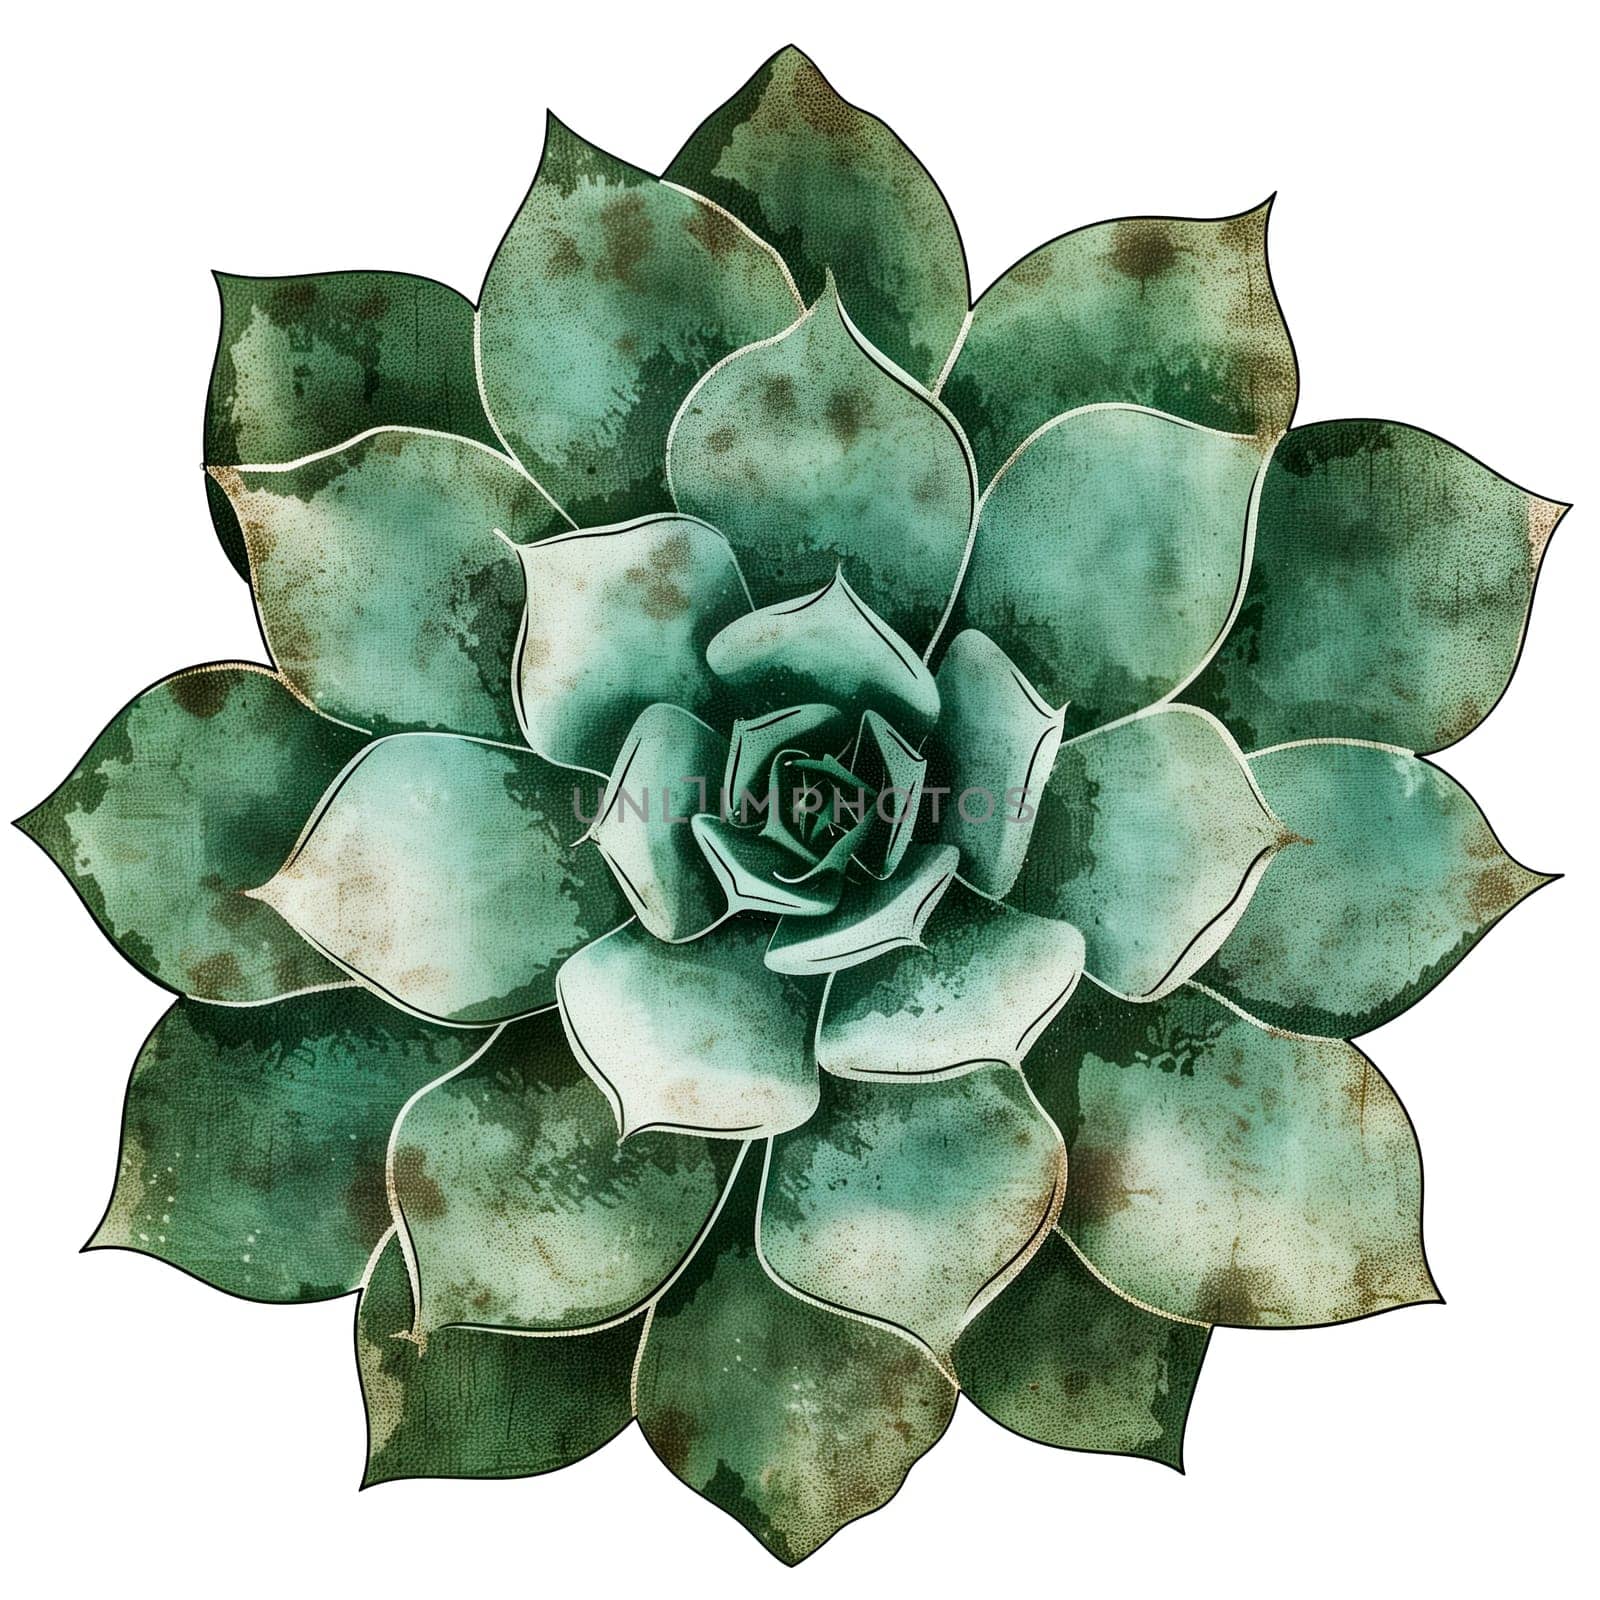 Isolated illustration of a succulent plant by Dustick